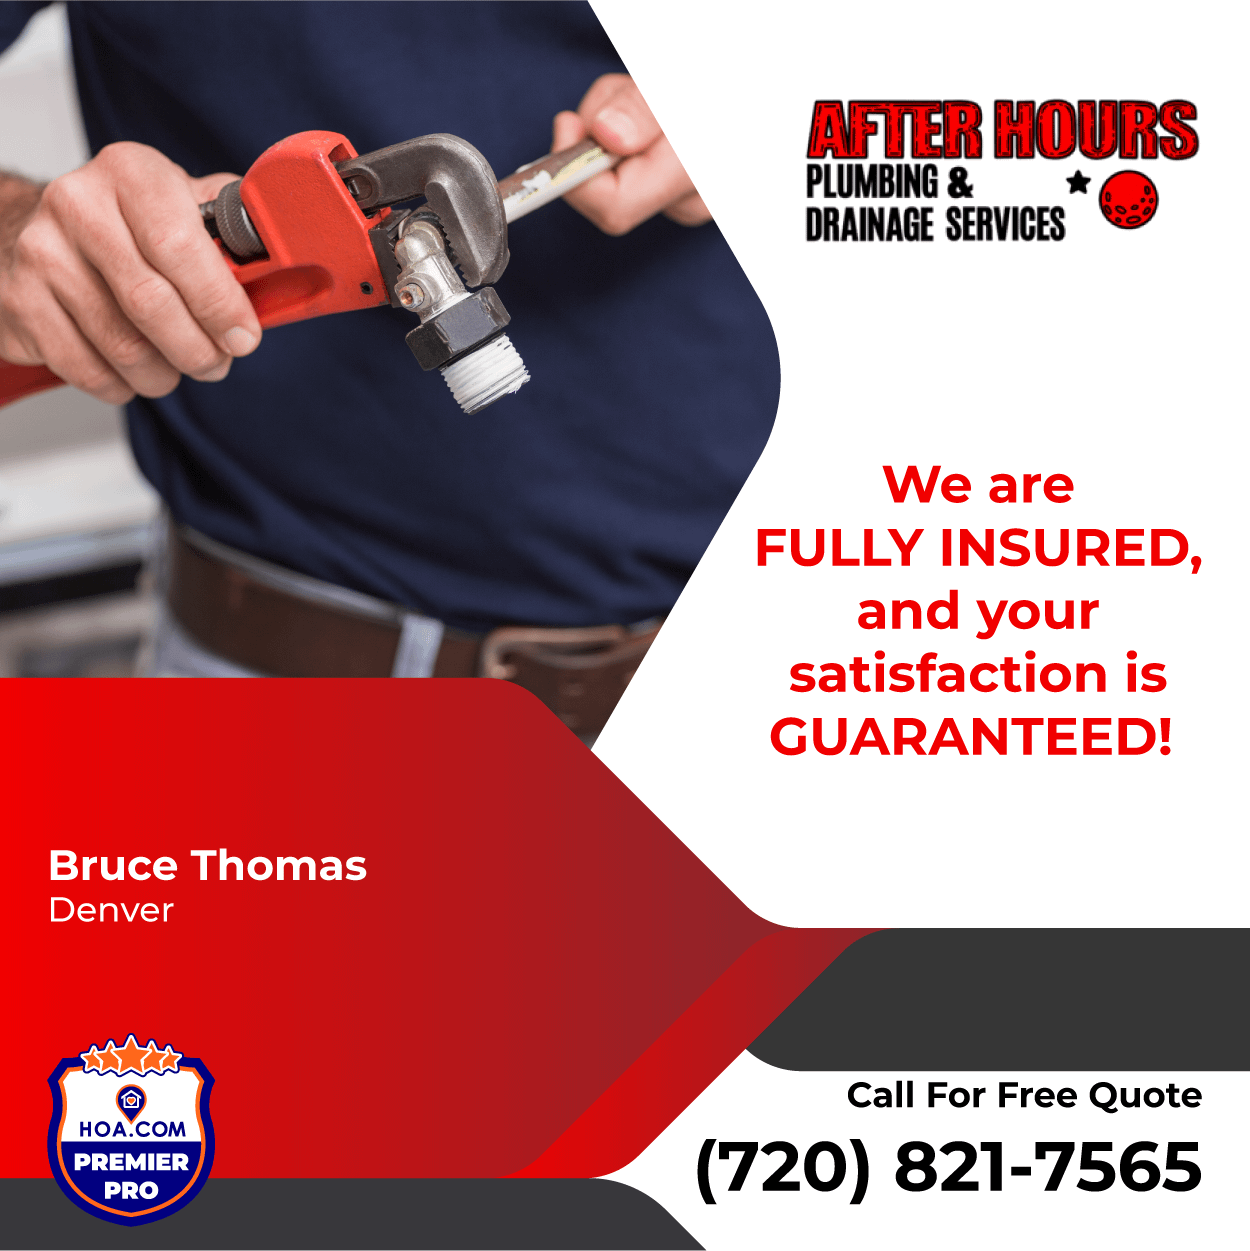 After Hours Plumbing & Drainage Services Satisfaction Guaranteed